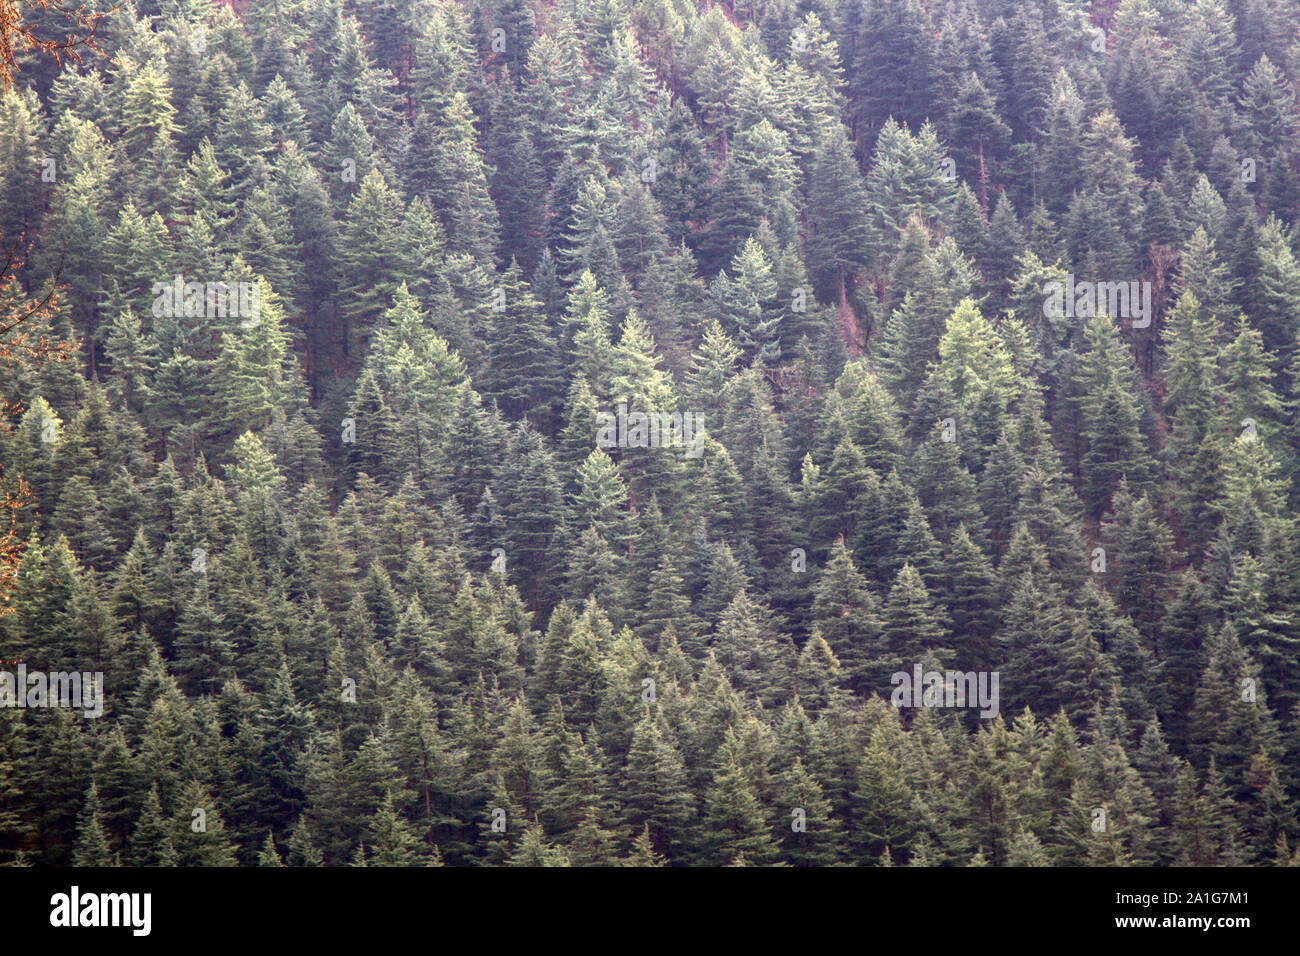 Himalayan fir (Abies spectabilis) on the slope of the Pre-Himalayas, Shiva mountain. Dense thickets of old high-stem trees Stock Photo